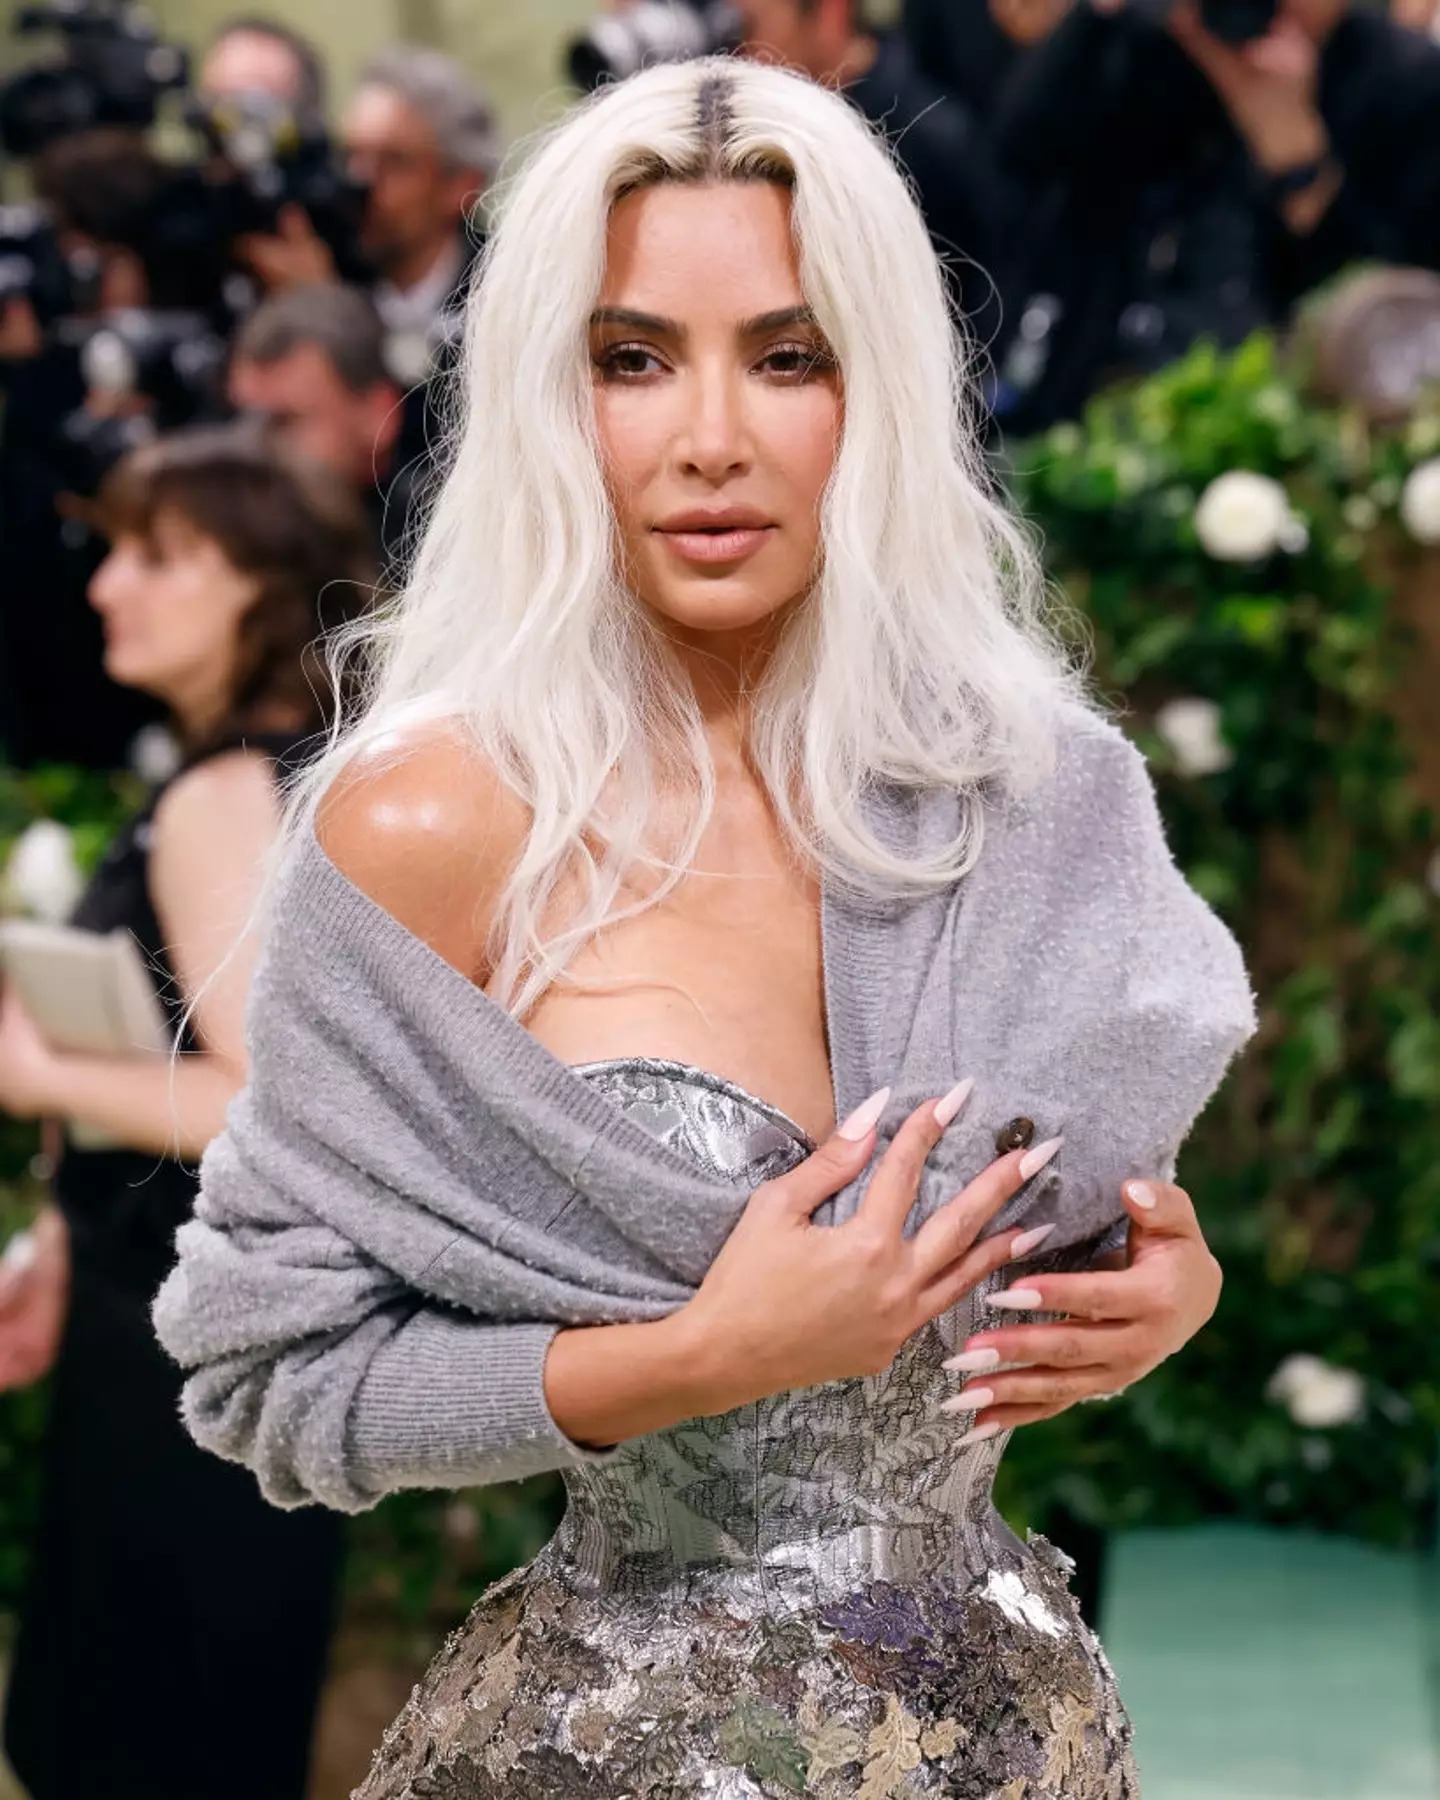 Kim Kardashian shocked at the Met Gala with her Galliano look. (Taylor Hill / Contributor / Getty Images)